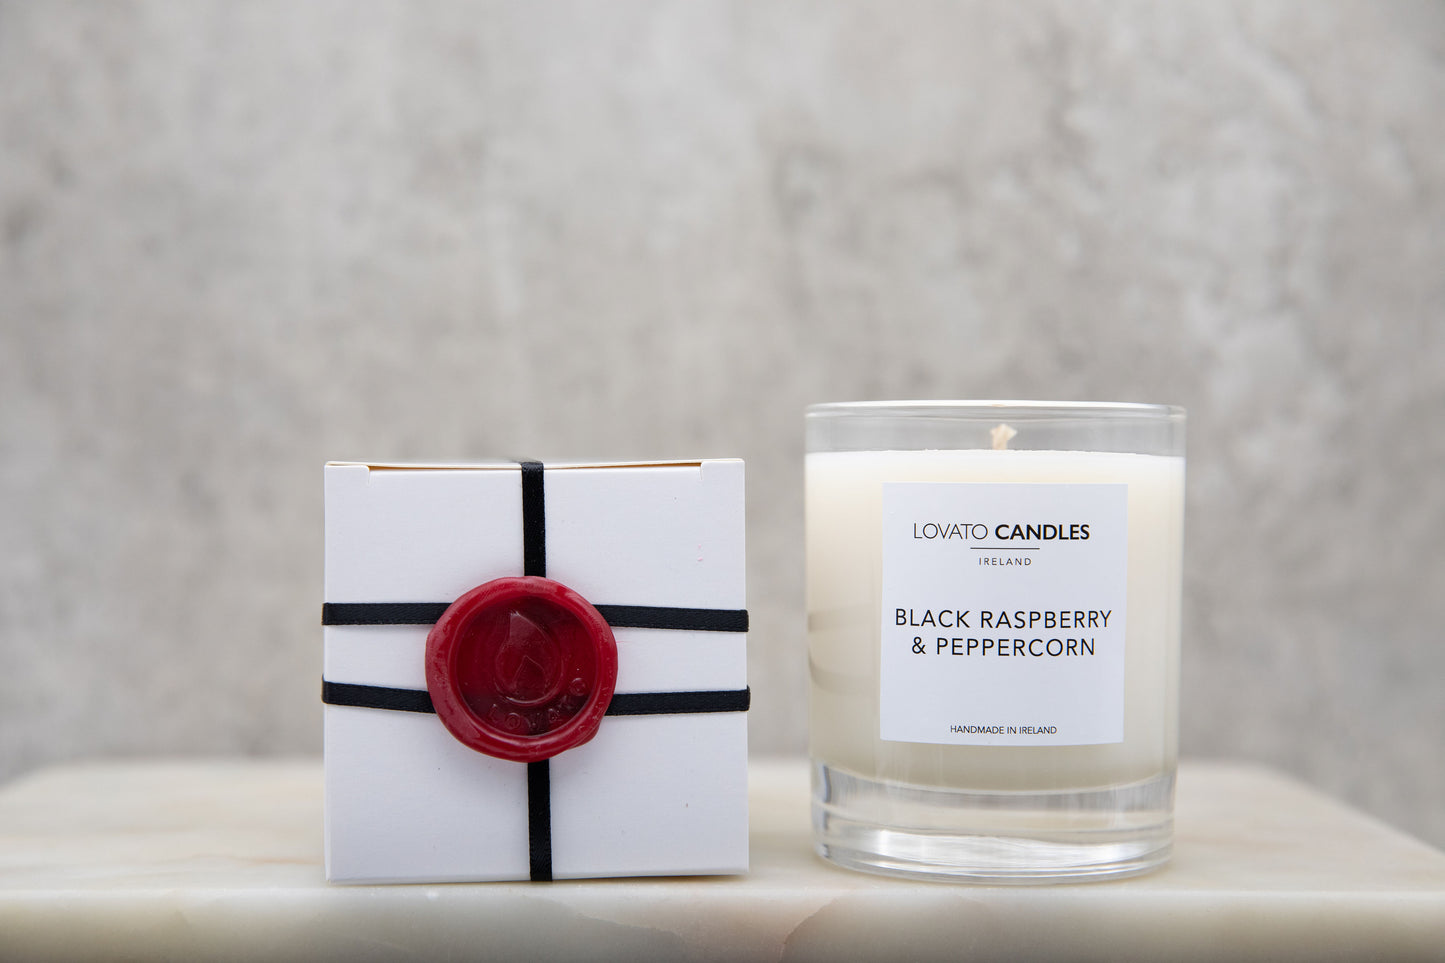 Clear Scented Candle with Luxury White Box - Black Raspberry & Peppercorn